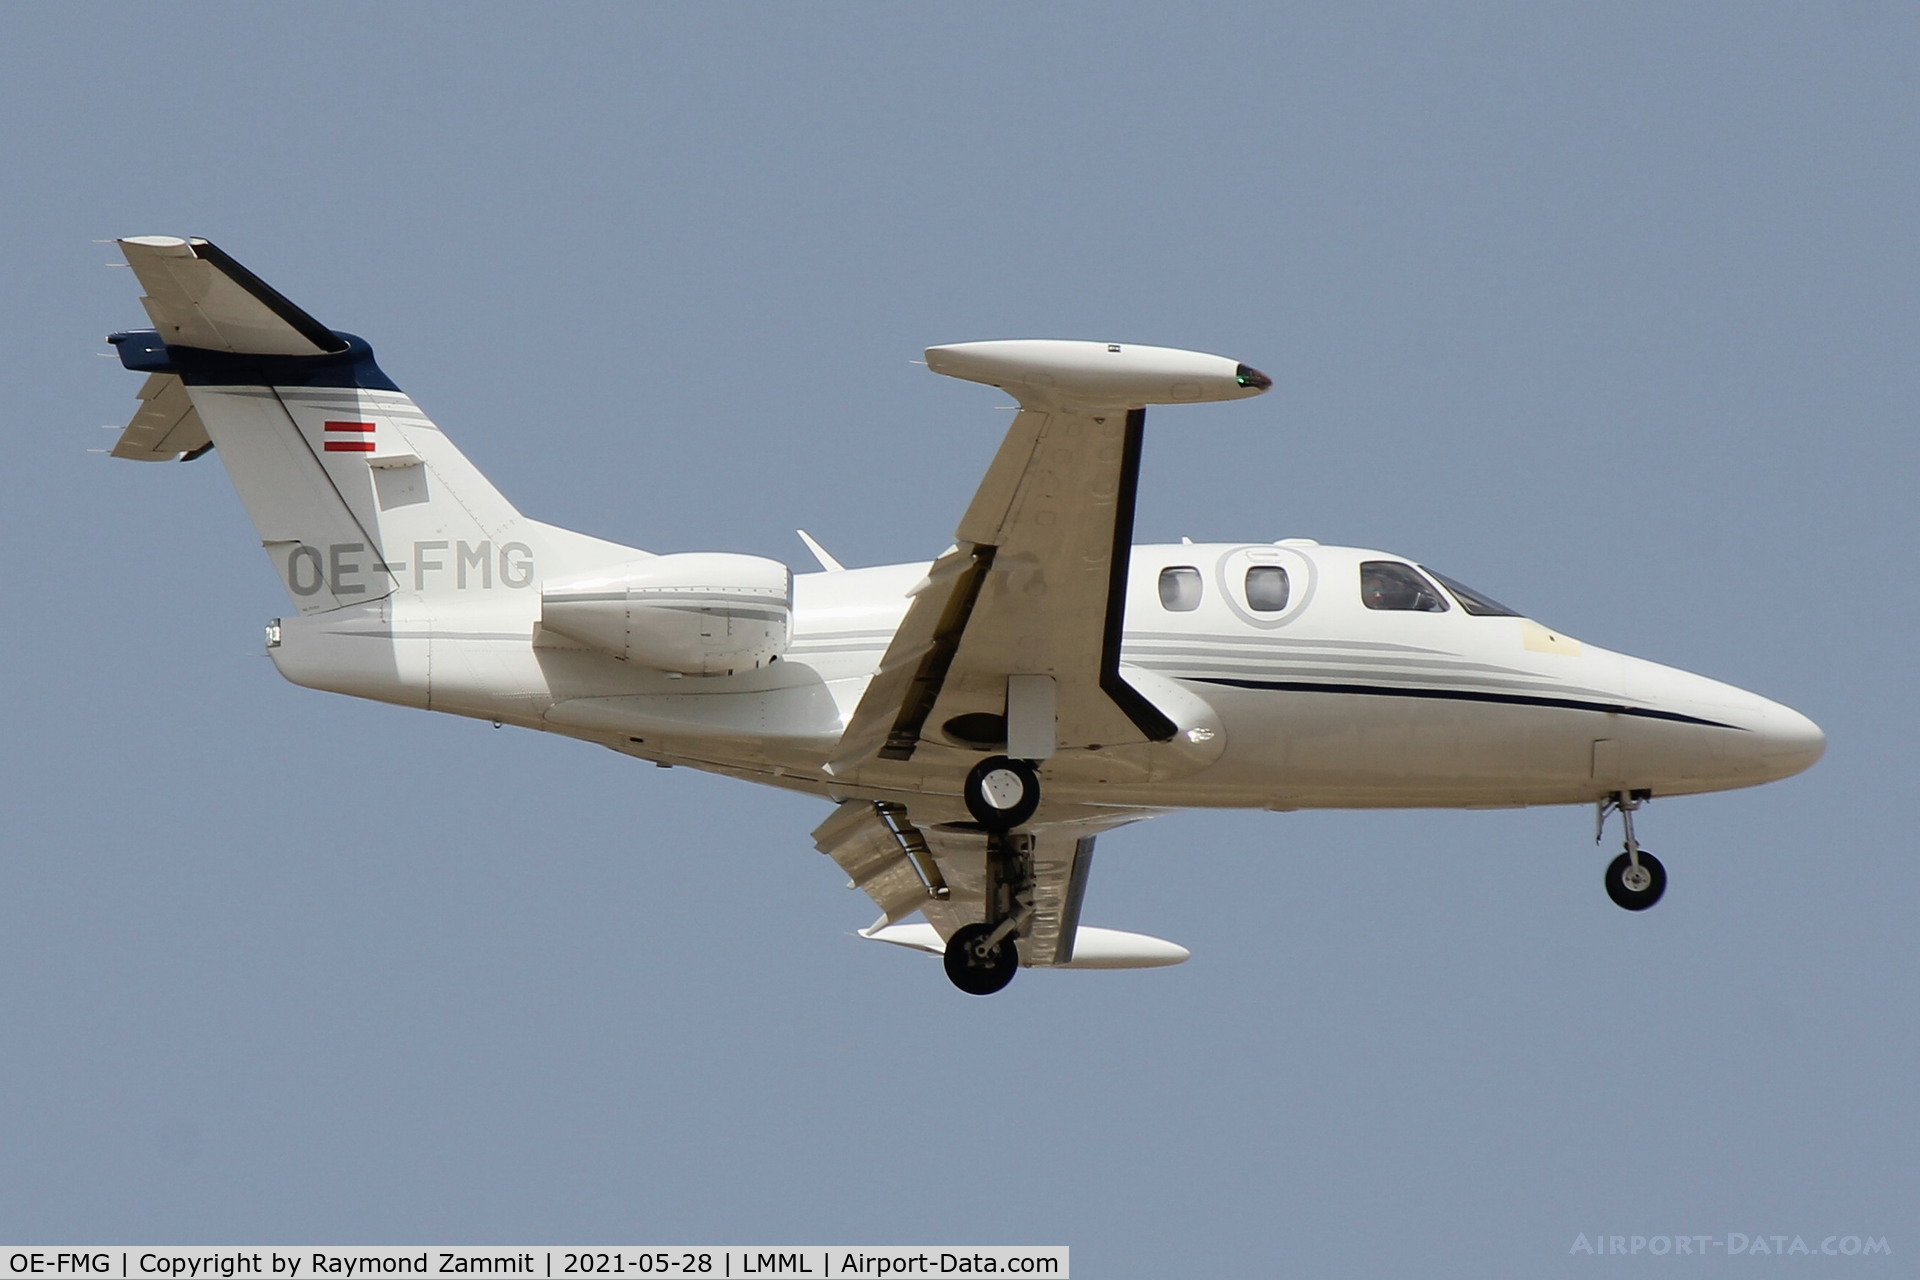 OE-FMG, 2008 Eclipse Aviation Corp EA500 C/N 000190, Eclipse Aviation Corp EA500 OE-FMG MaliAir Flug